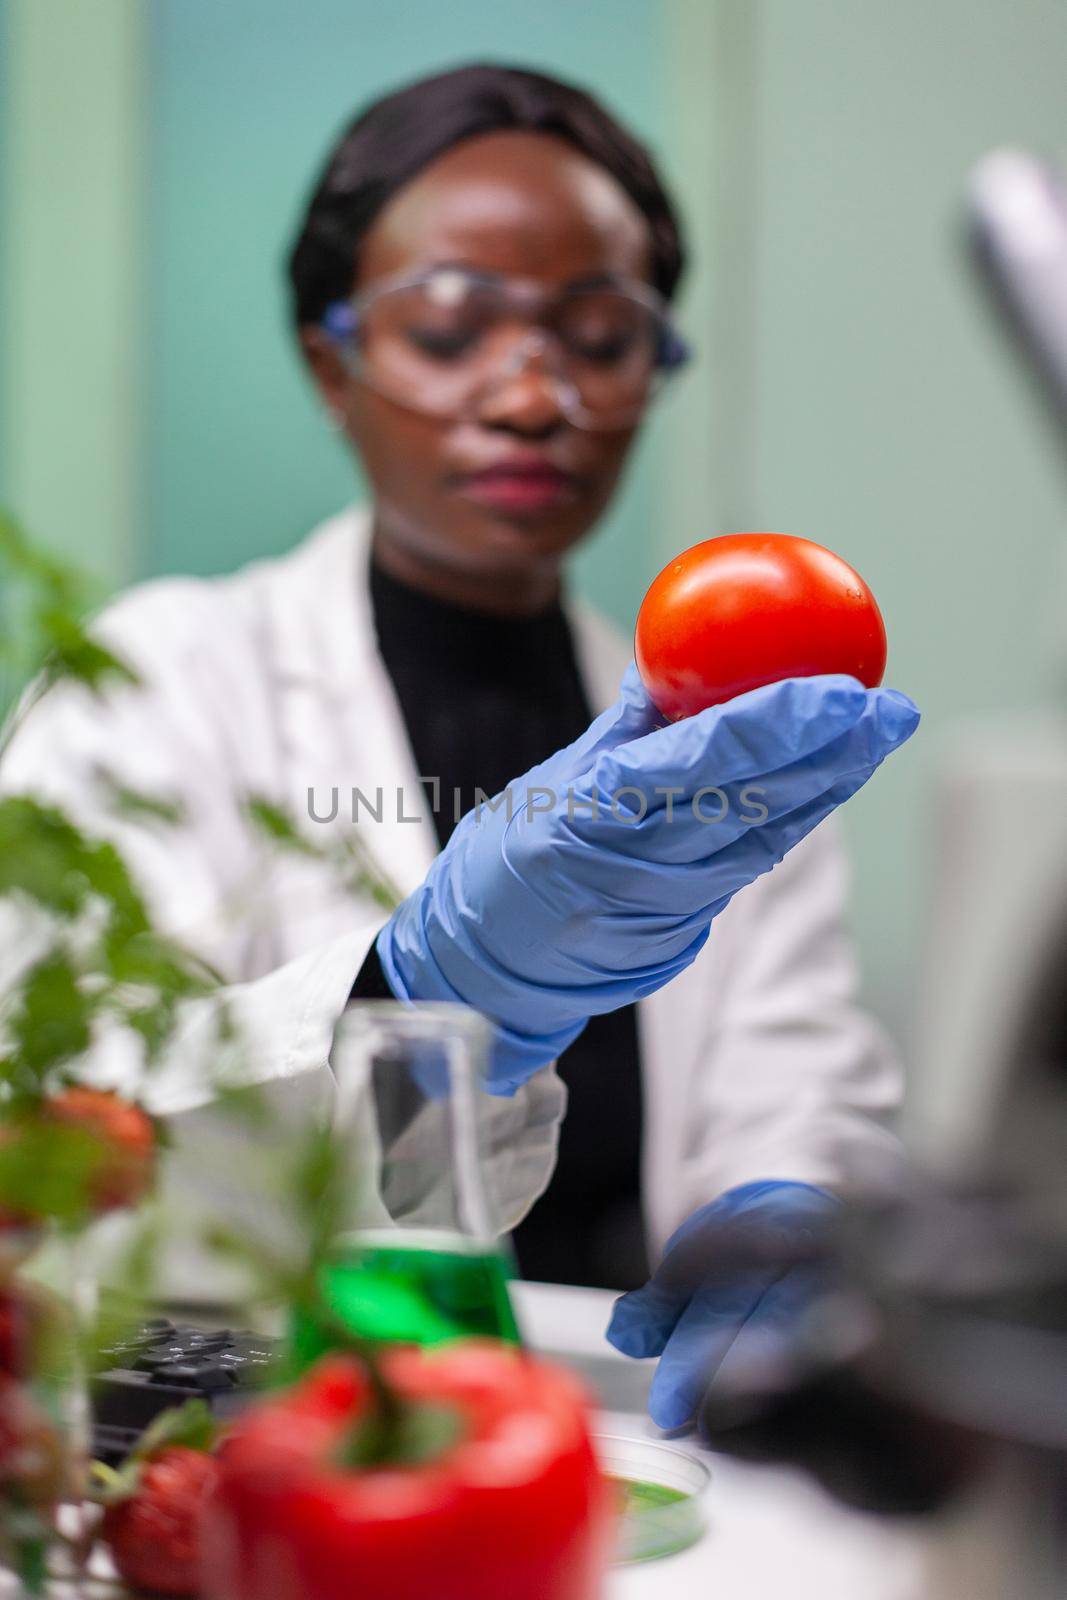 Front view of biologist reseacher woman analyzing tomato injected with chemical dna for scientific agriculture experiment. Pharmaceutical scientist working in microbiology laboratory.